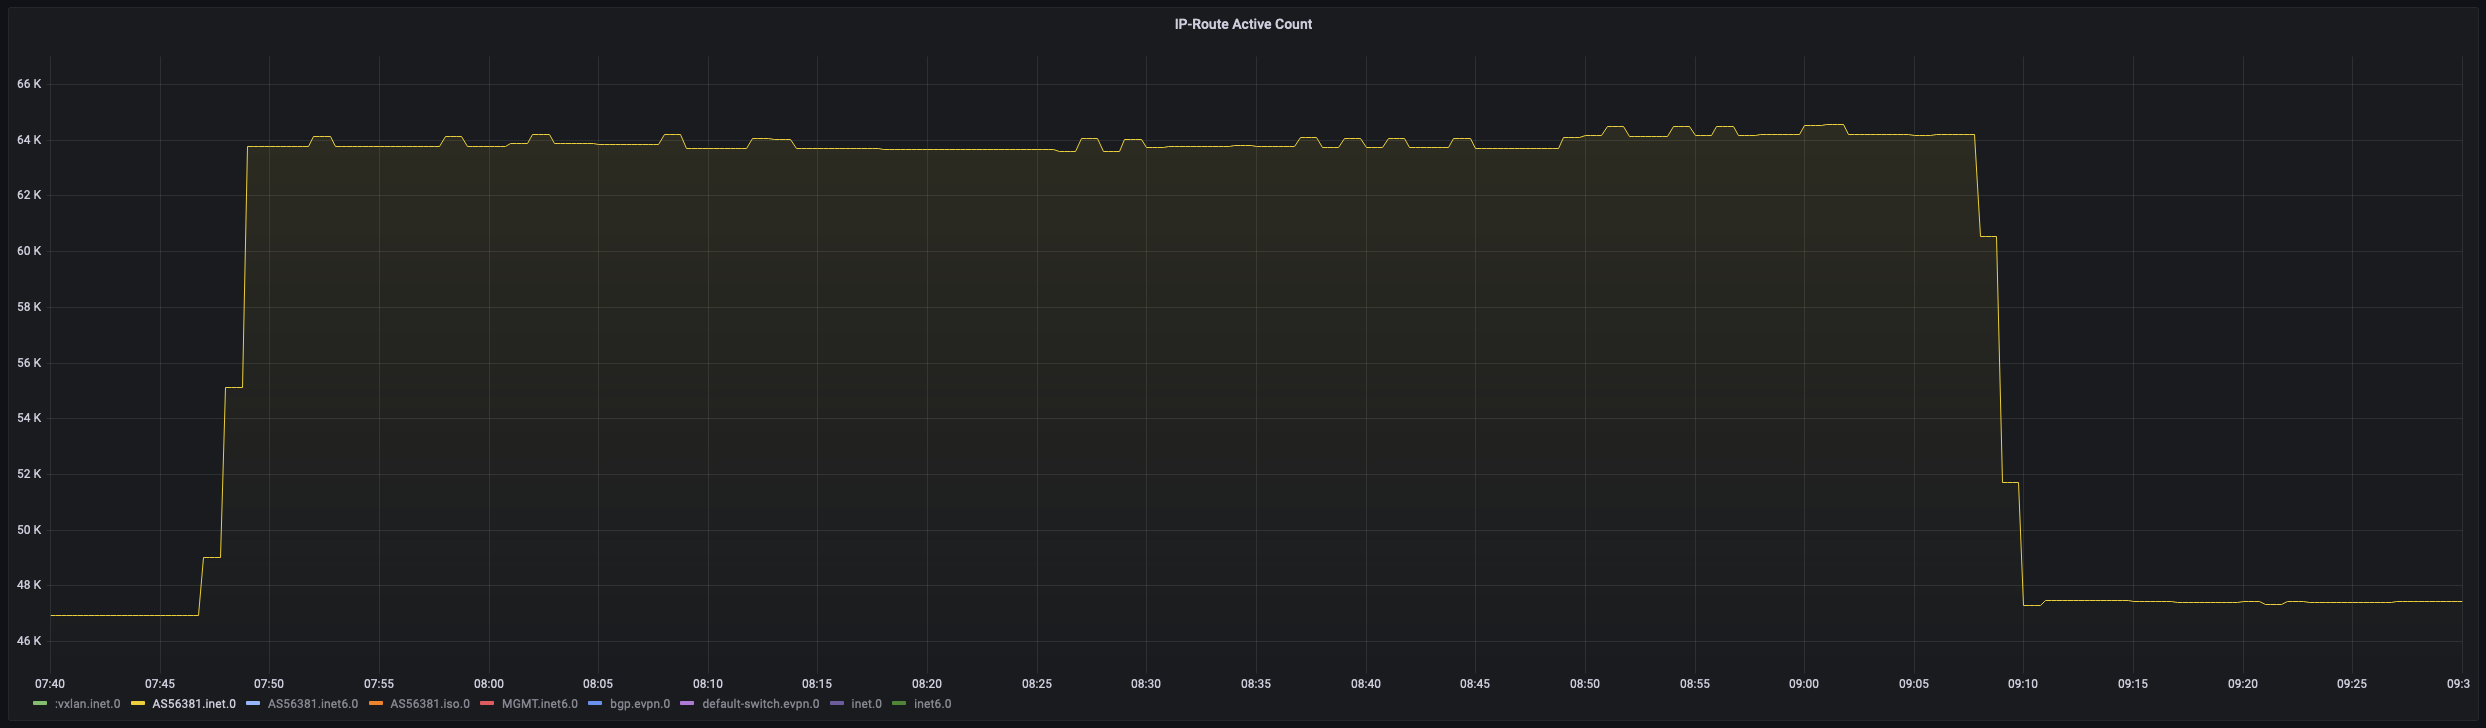 Grafana Dashboard showing active route count